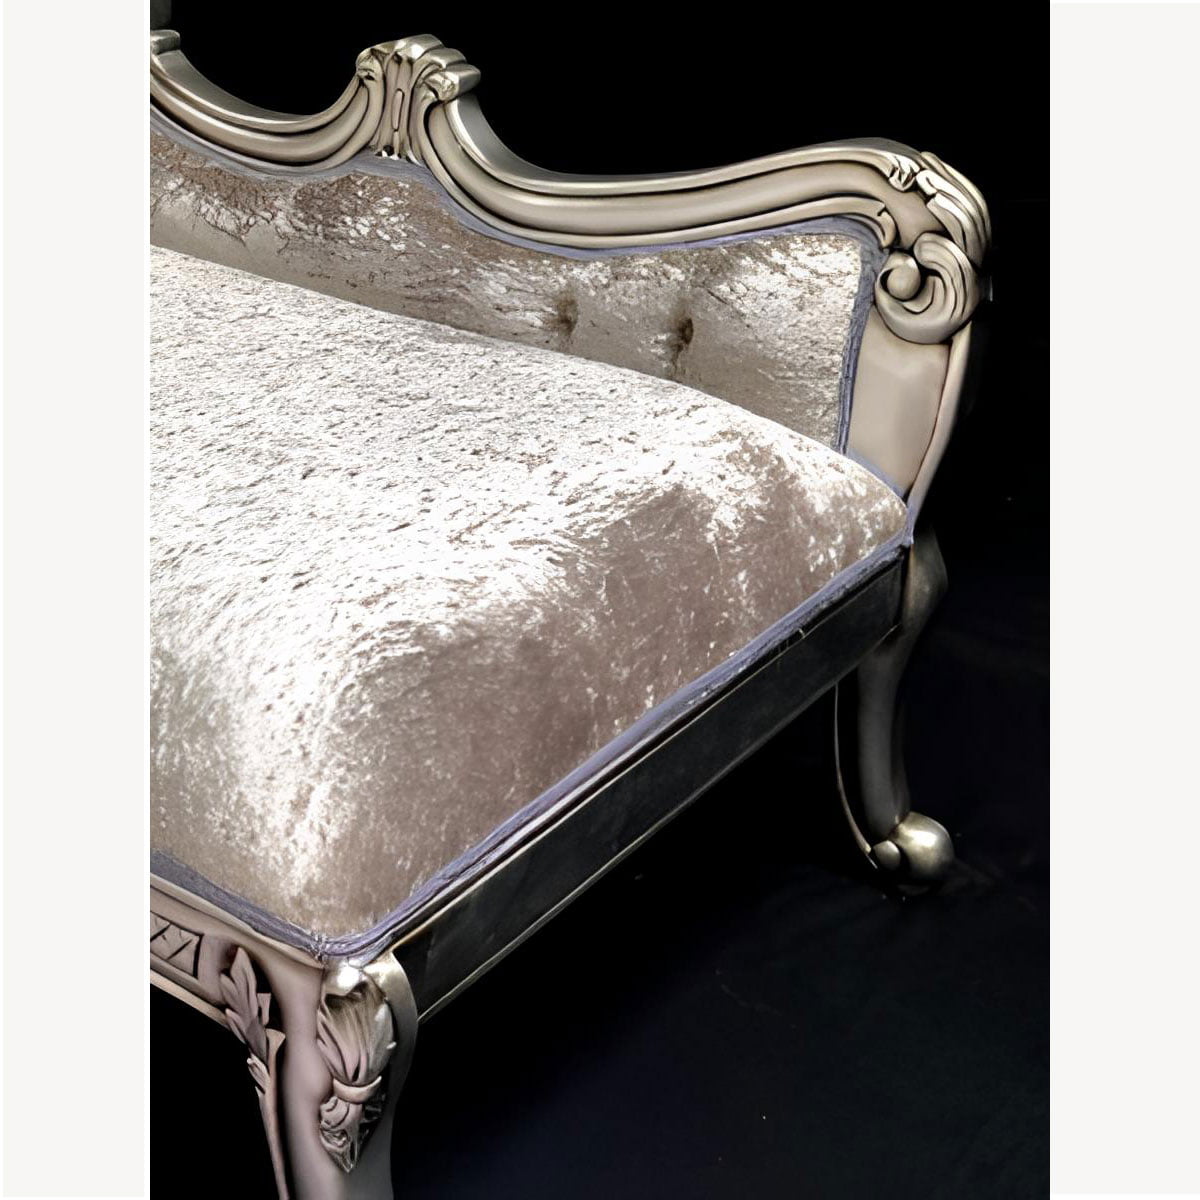 Armani Chaise Longue In Silver Leaf Mercury Silver Crushed Velvet 2 - Hampshire Barn Interiors - About Us -